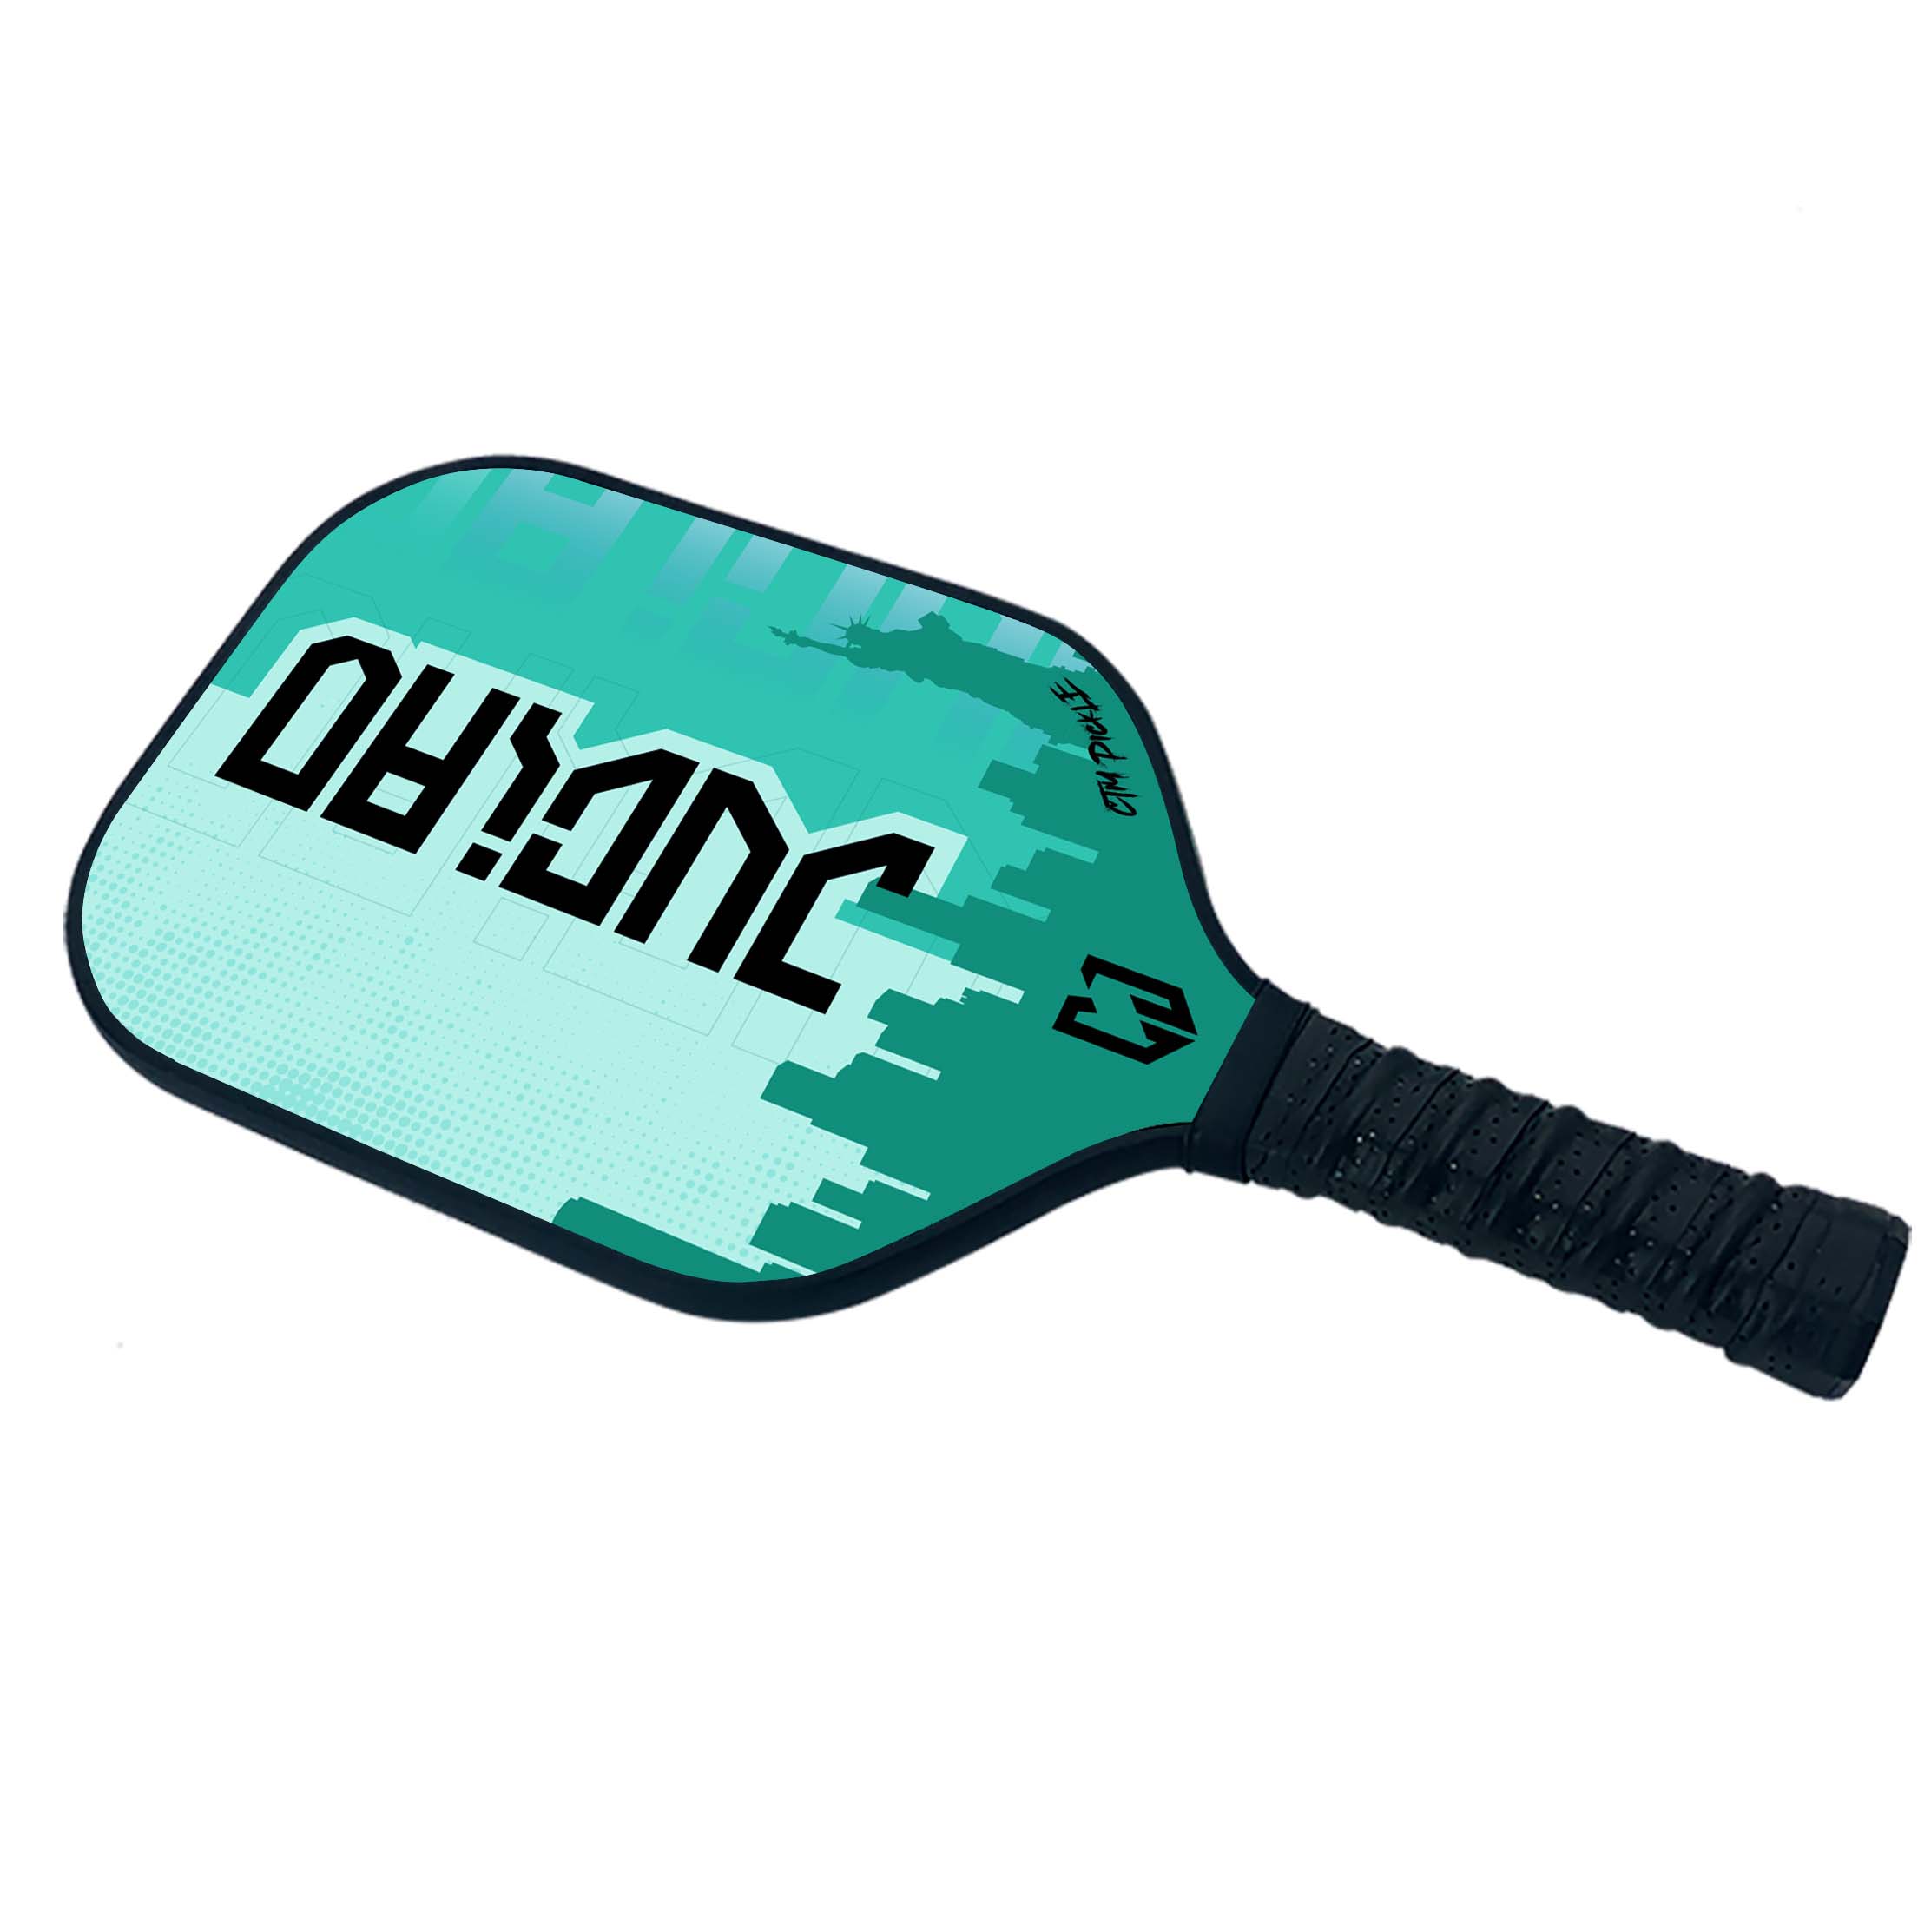 The Provide Customized USAPA Standard Best Selling Style Carbon Fiber Pickleball Paddle